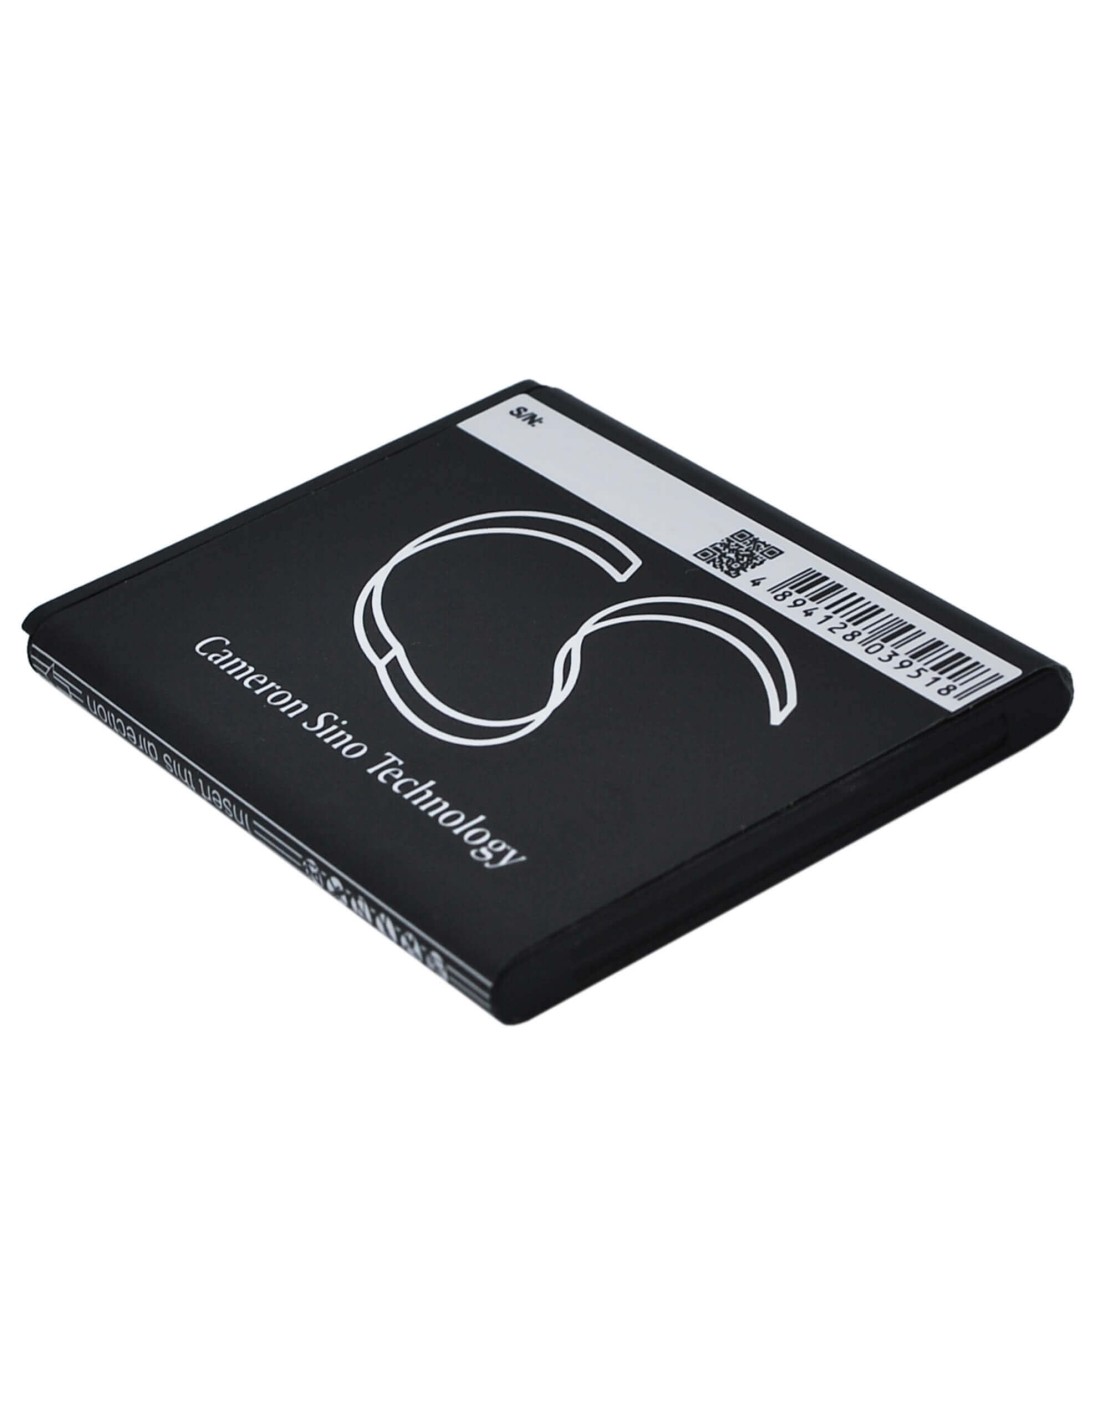 Battery for Samsung GT-S5570, Galaxy Mini, GT-S5250 3.7V, 1200mAh - 4.44Wh